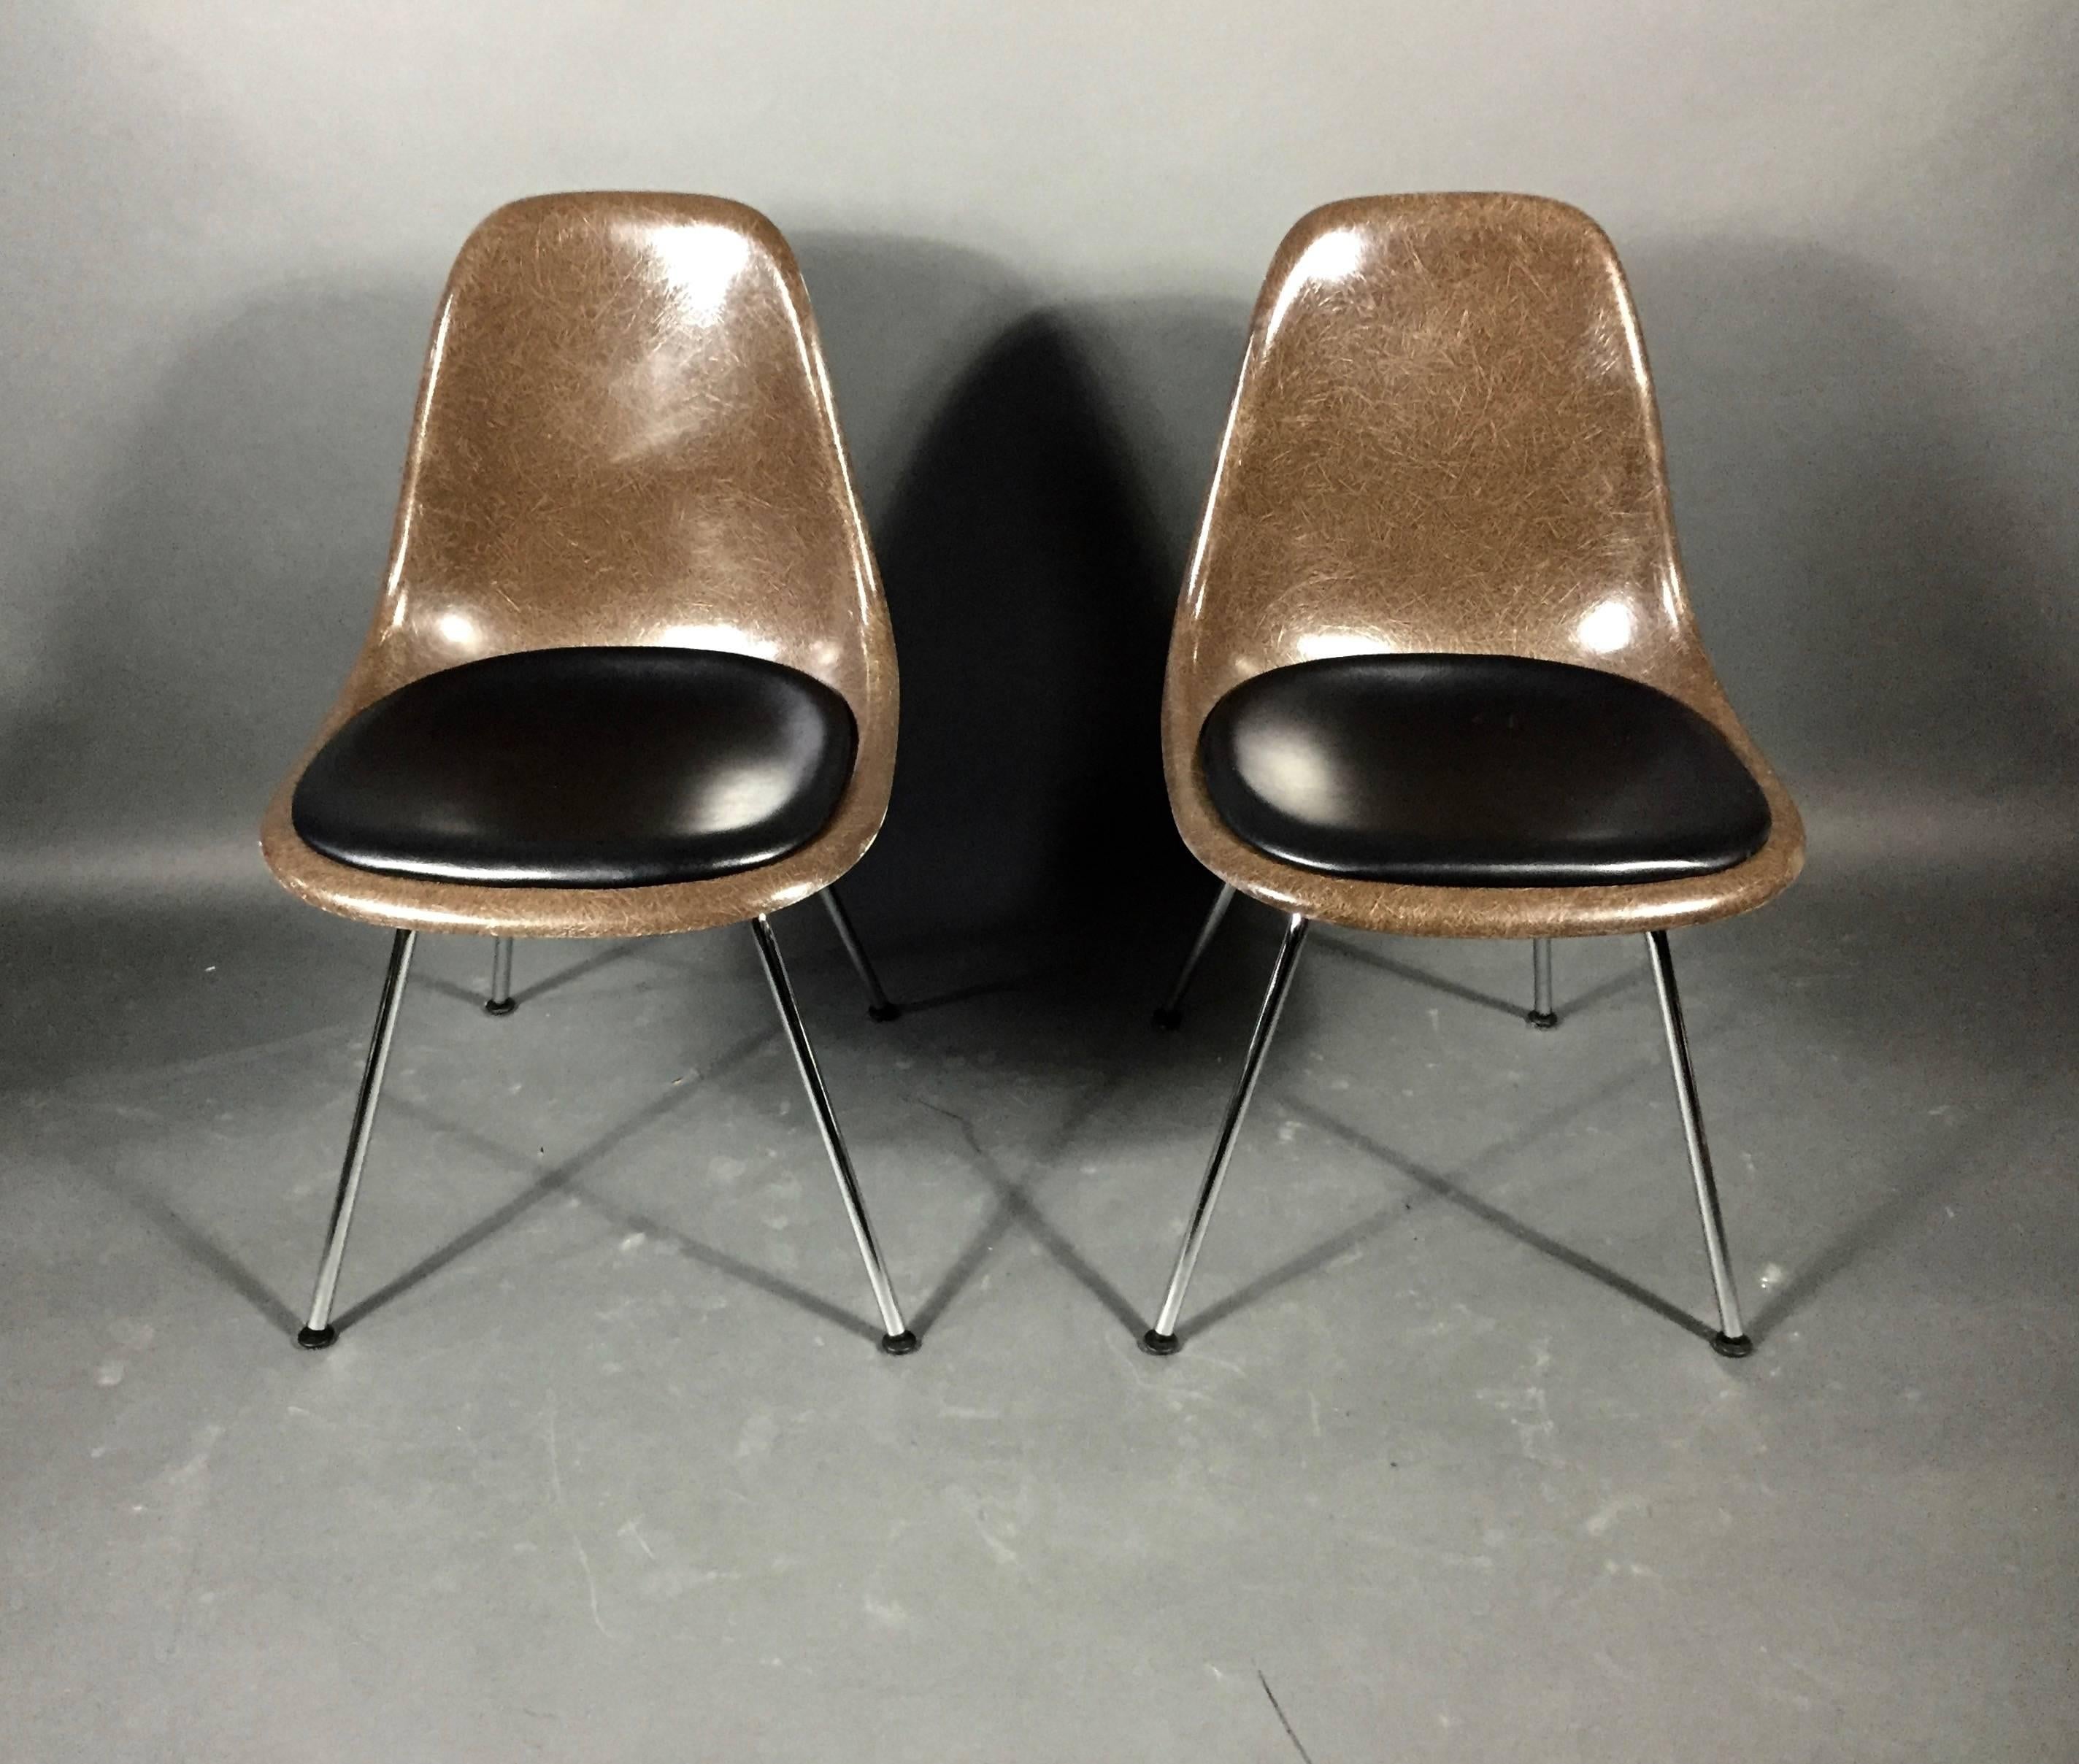 One of my favorite chairs made better. Original molded brown fiberglass shell chairs by Charles and Ray Eames (designed 1948) produced by Herman Miller. Professionally updated with Switzerland-based Vitra Steel-H bases and cushions upholstered in